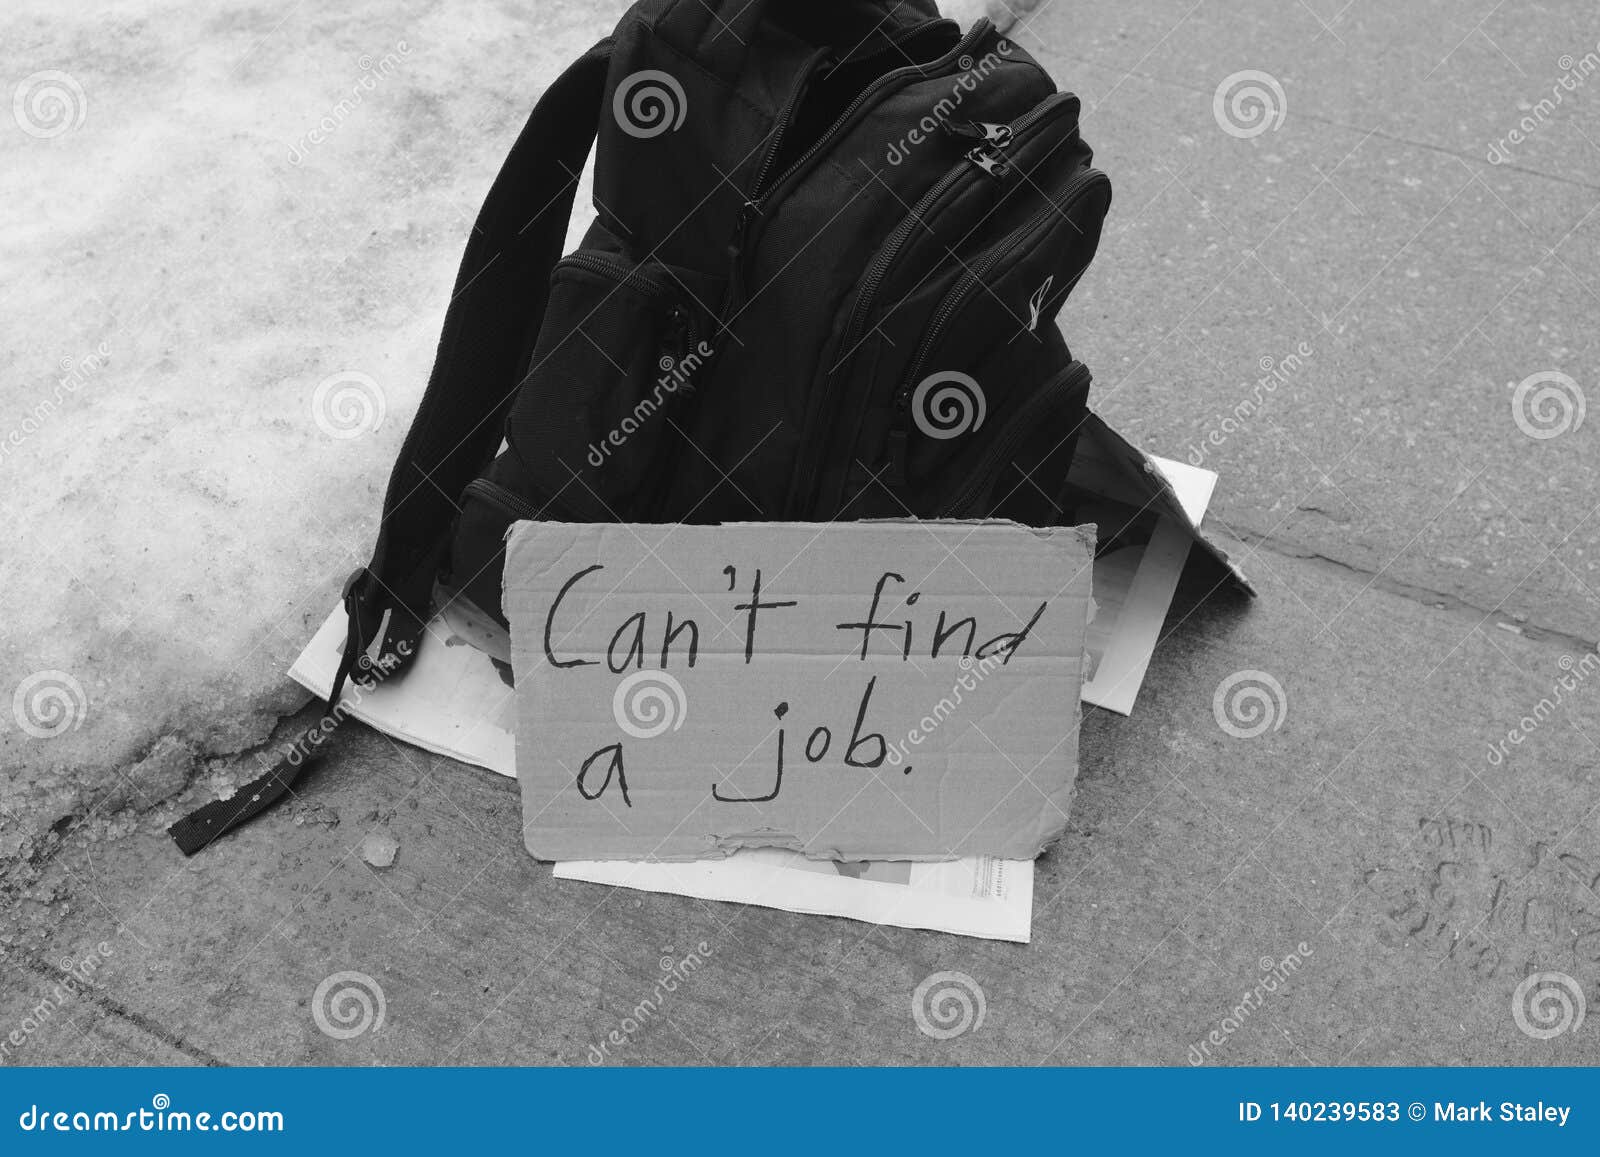 Can`t find a job. stock image. Image of sign, panhandlers 140239583